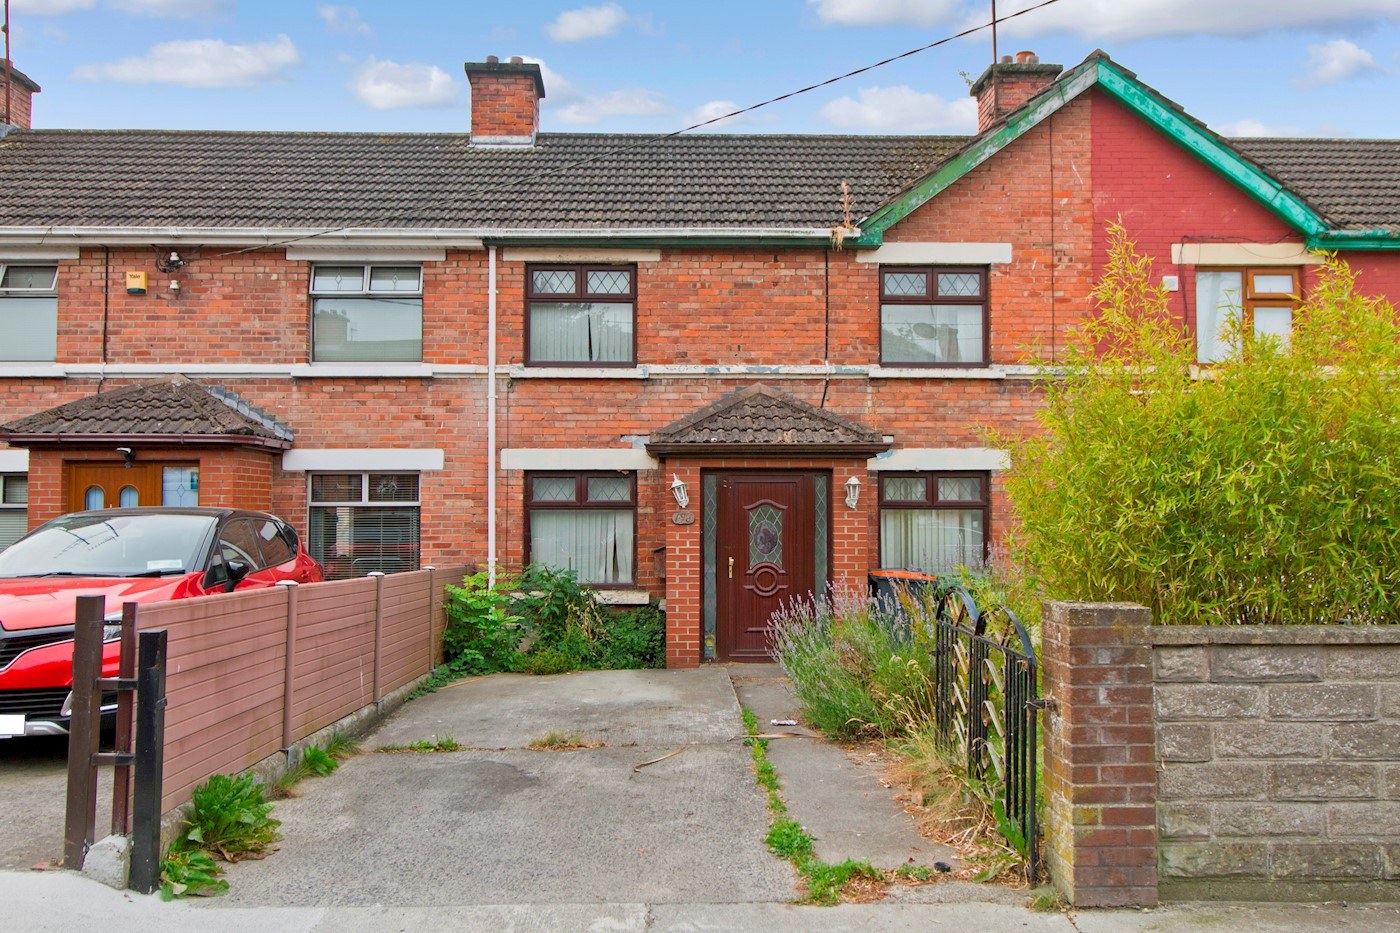 193 Pearse Park, Drogheda, Co. Louth, A92 DYW5 1/3